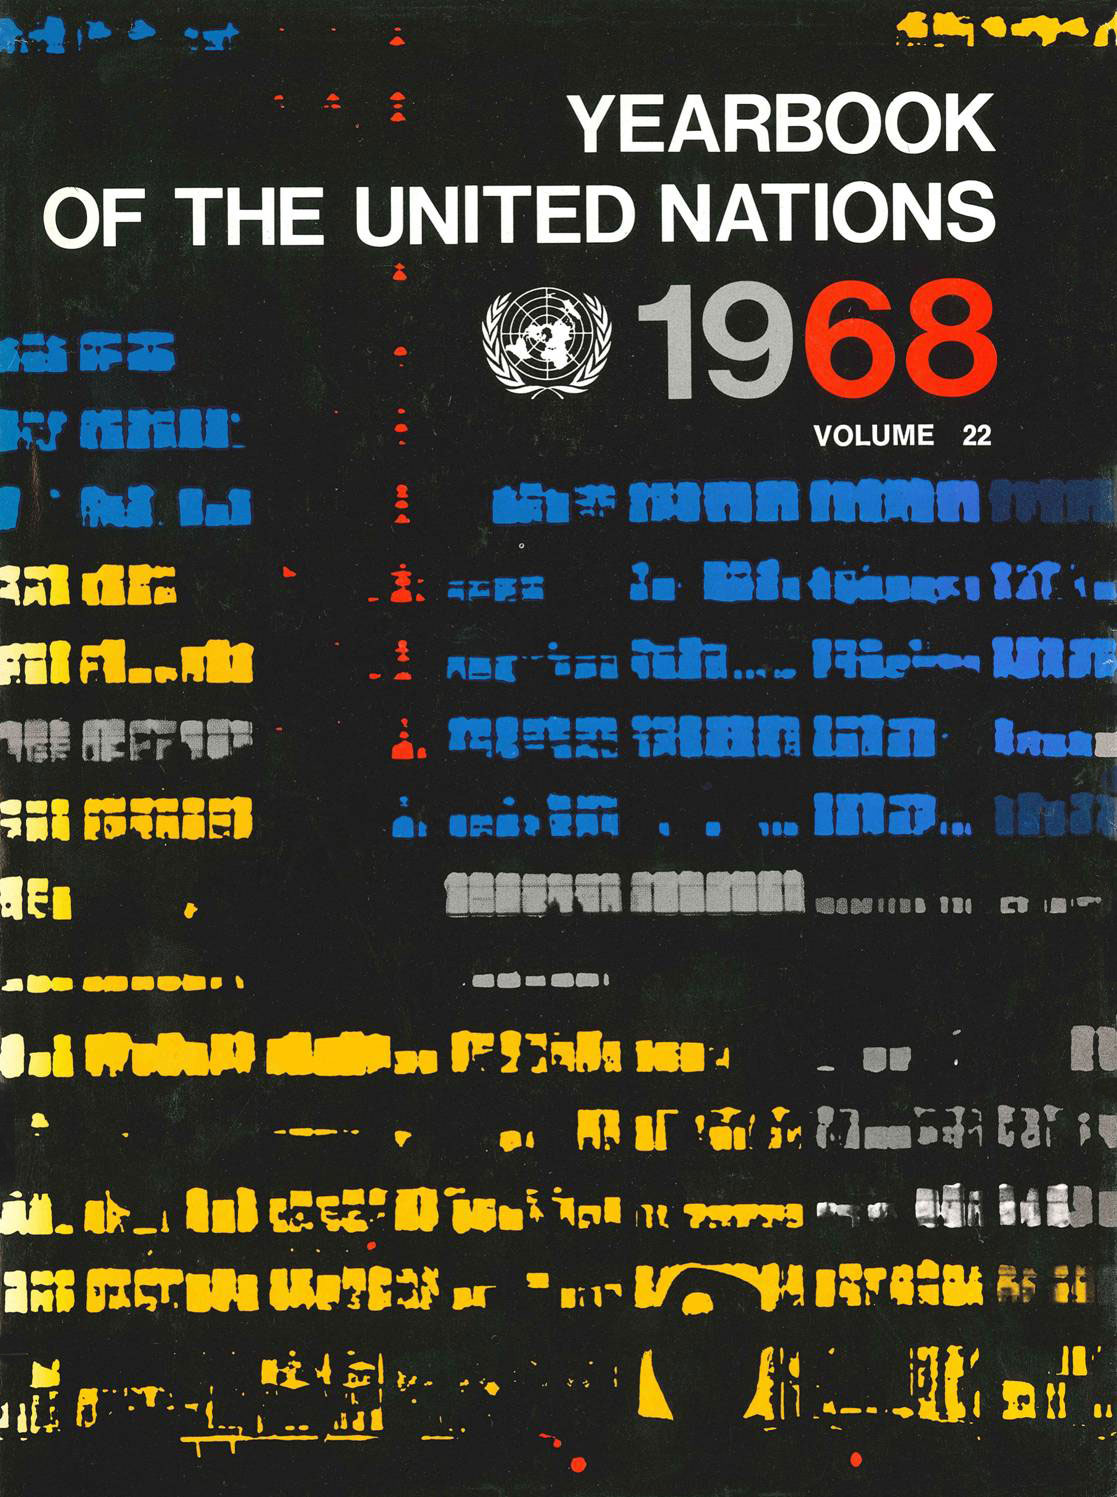 image of Yearbook of the United Nations 1968